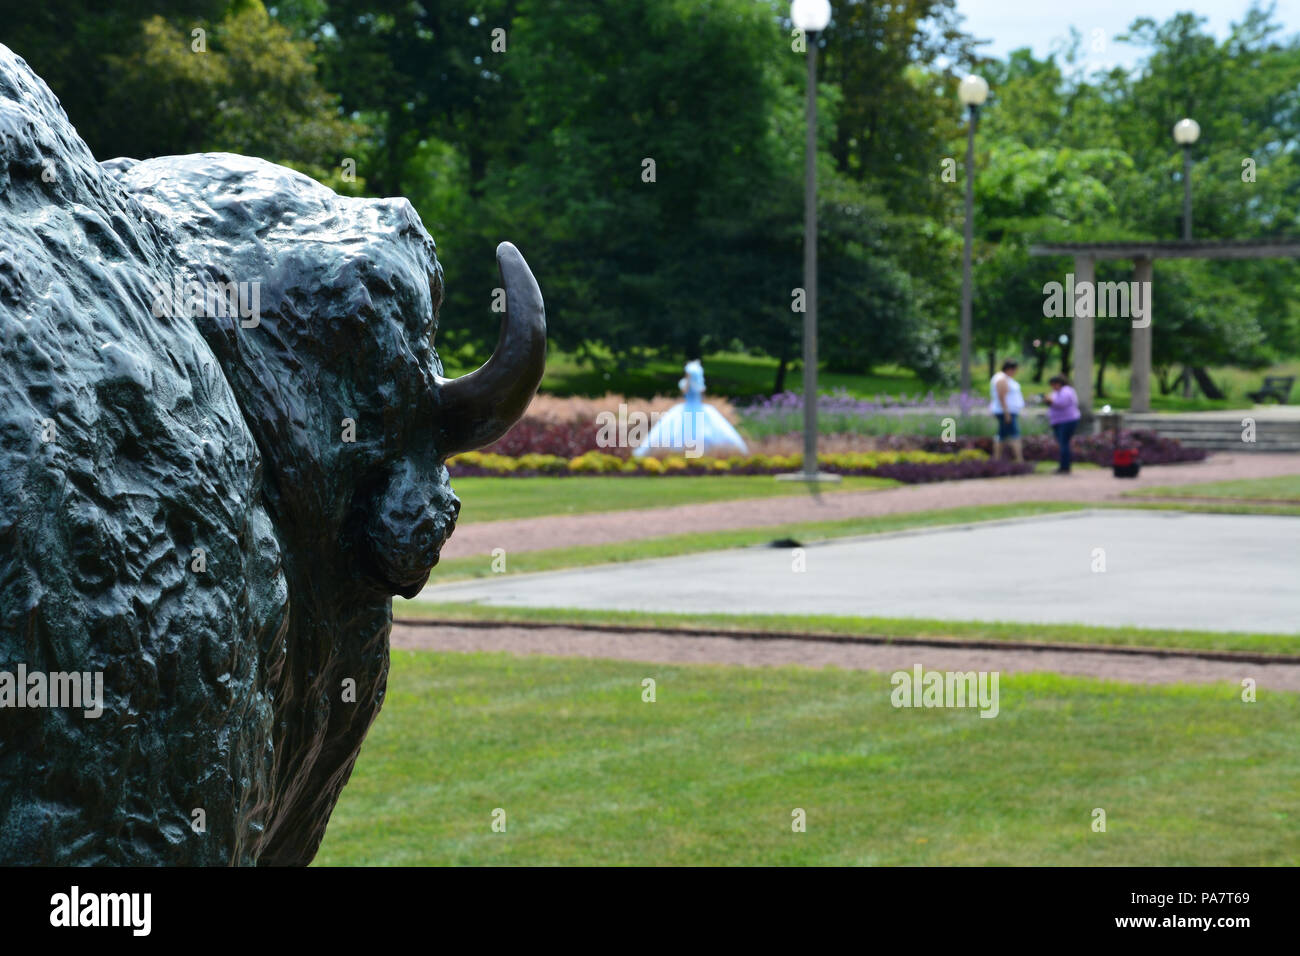 Bison monument looking off towards a family photo shoot in the Humboldt Park formal gardens on Chicago's west side. Stock Photo